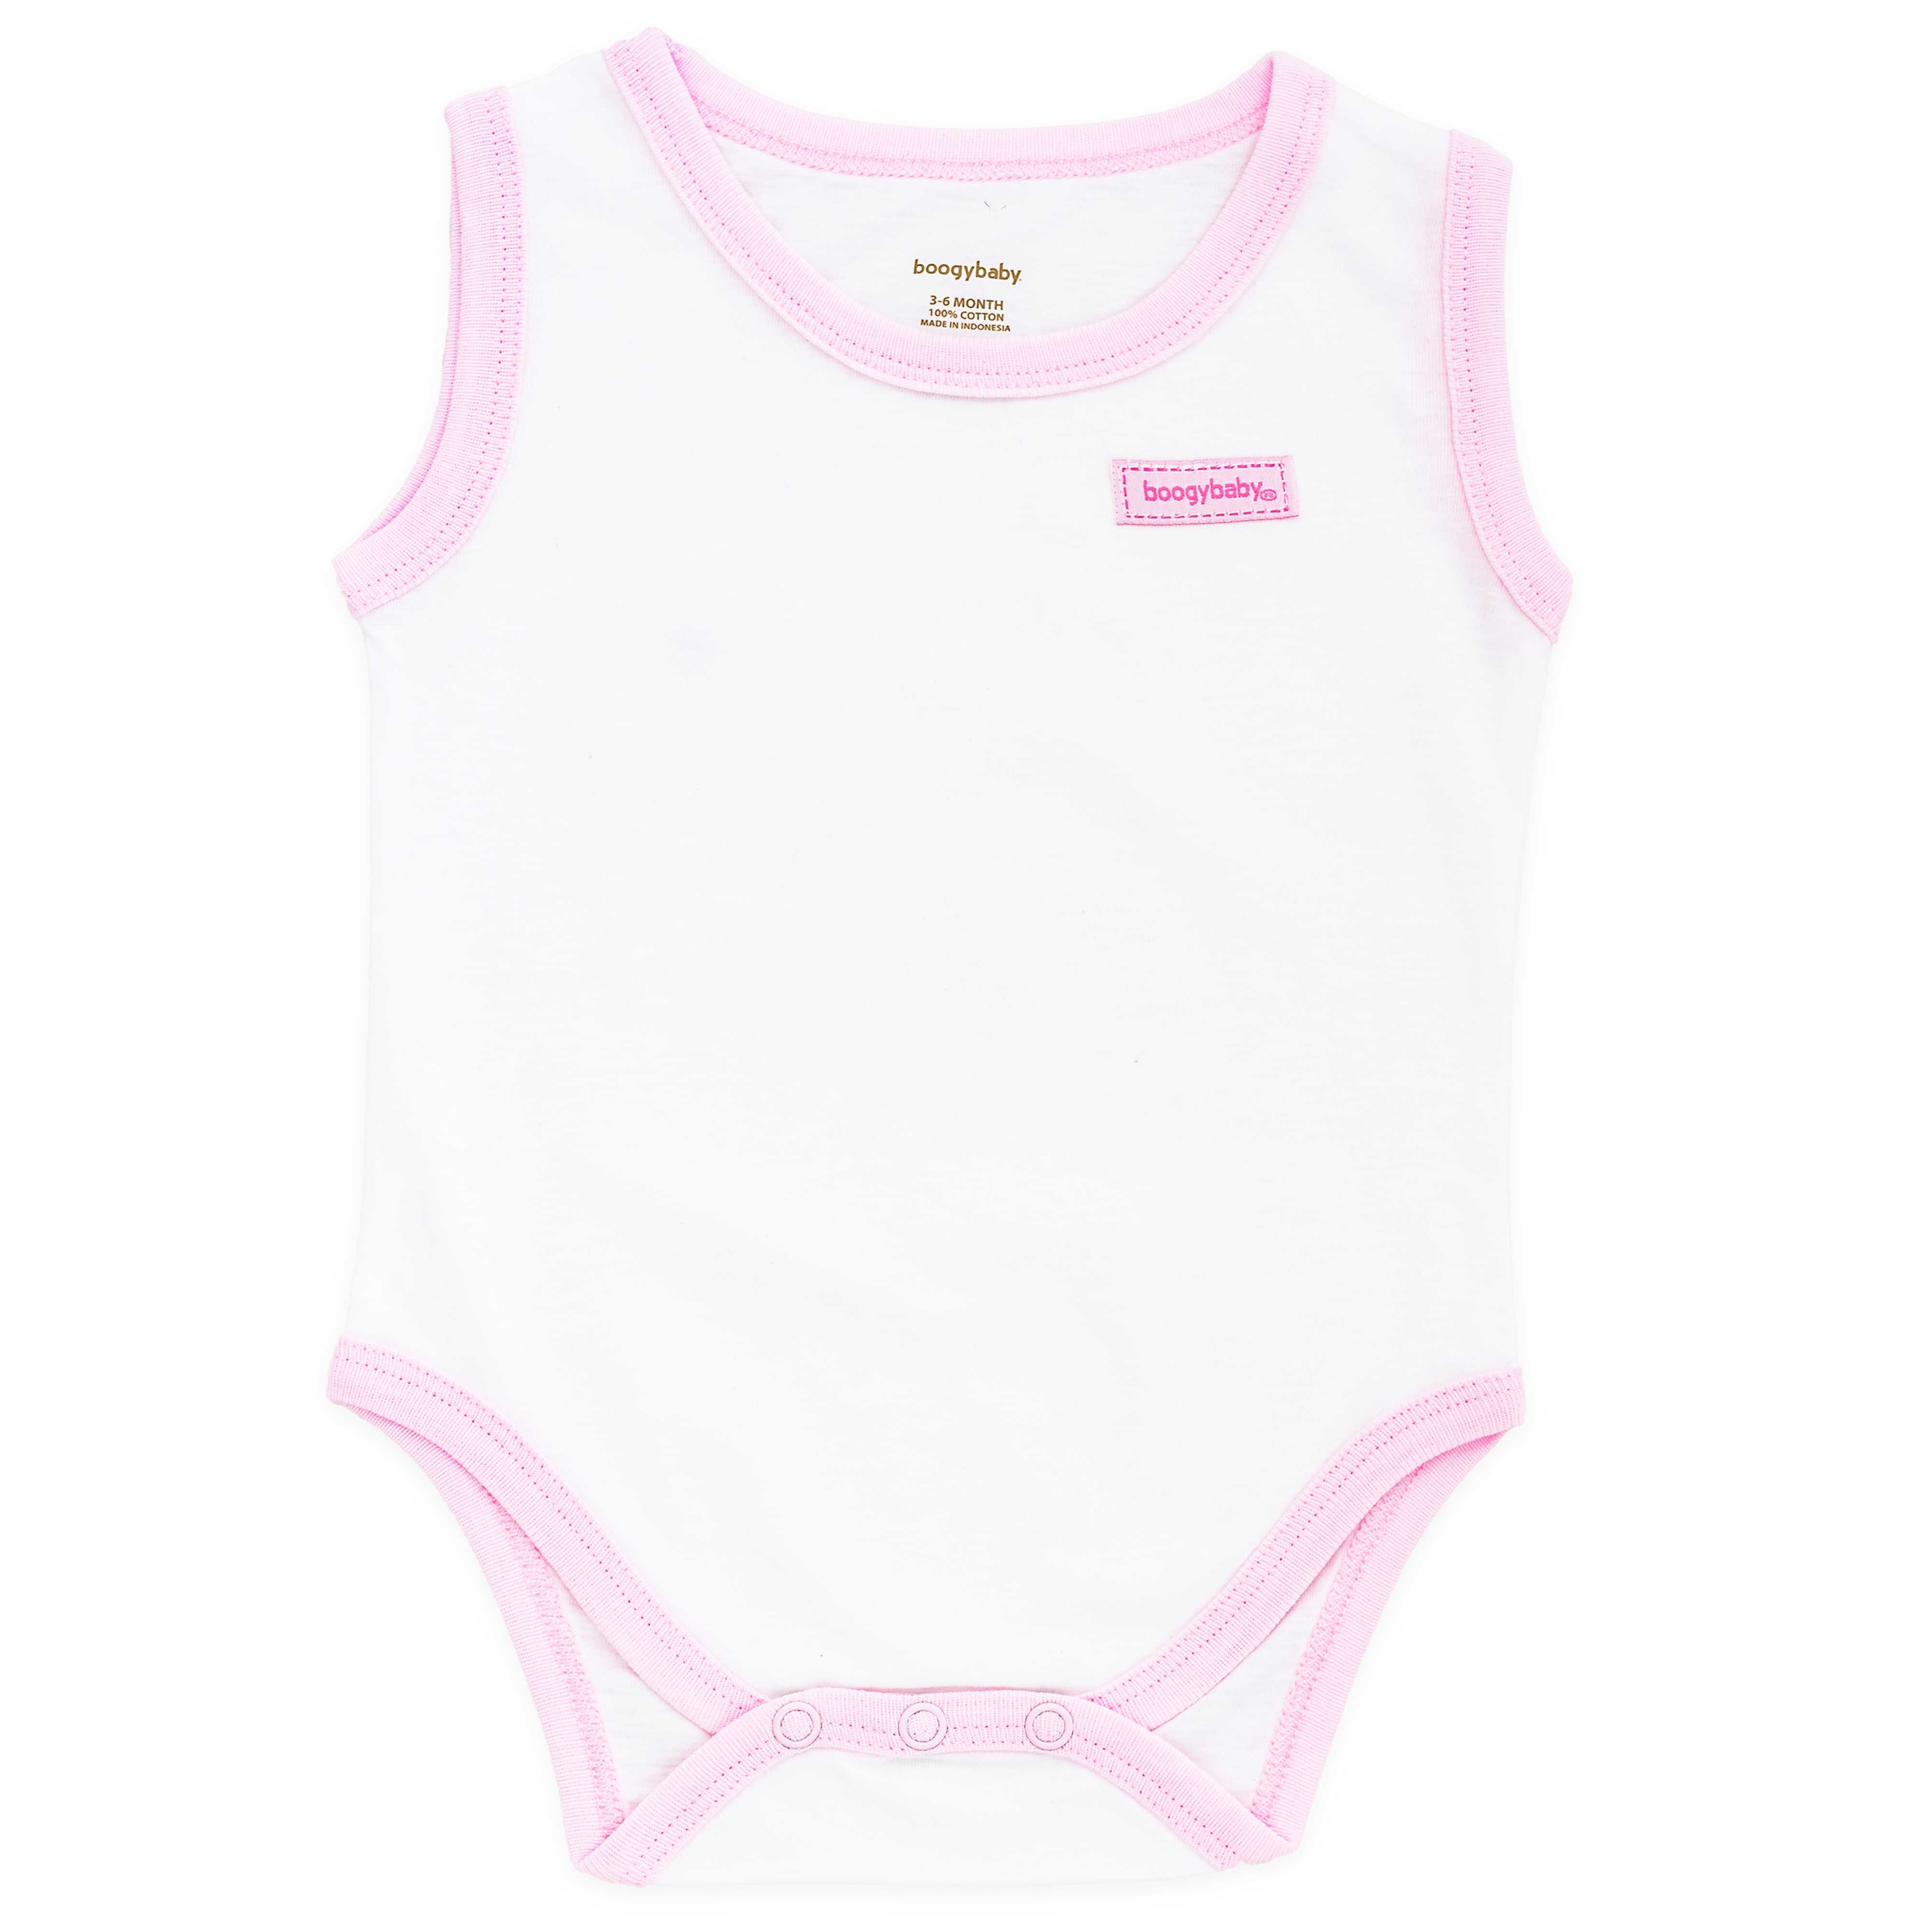 Boogybaby Sleeveless Suit -6-9Month-Pink - 1